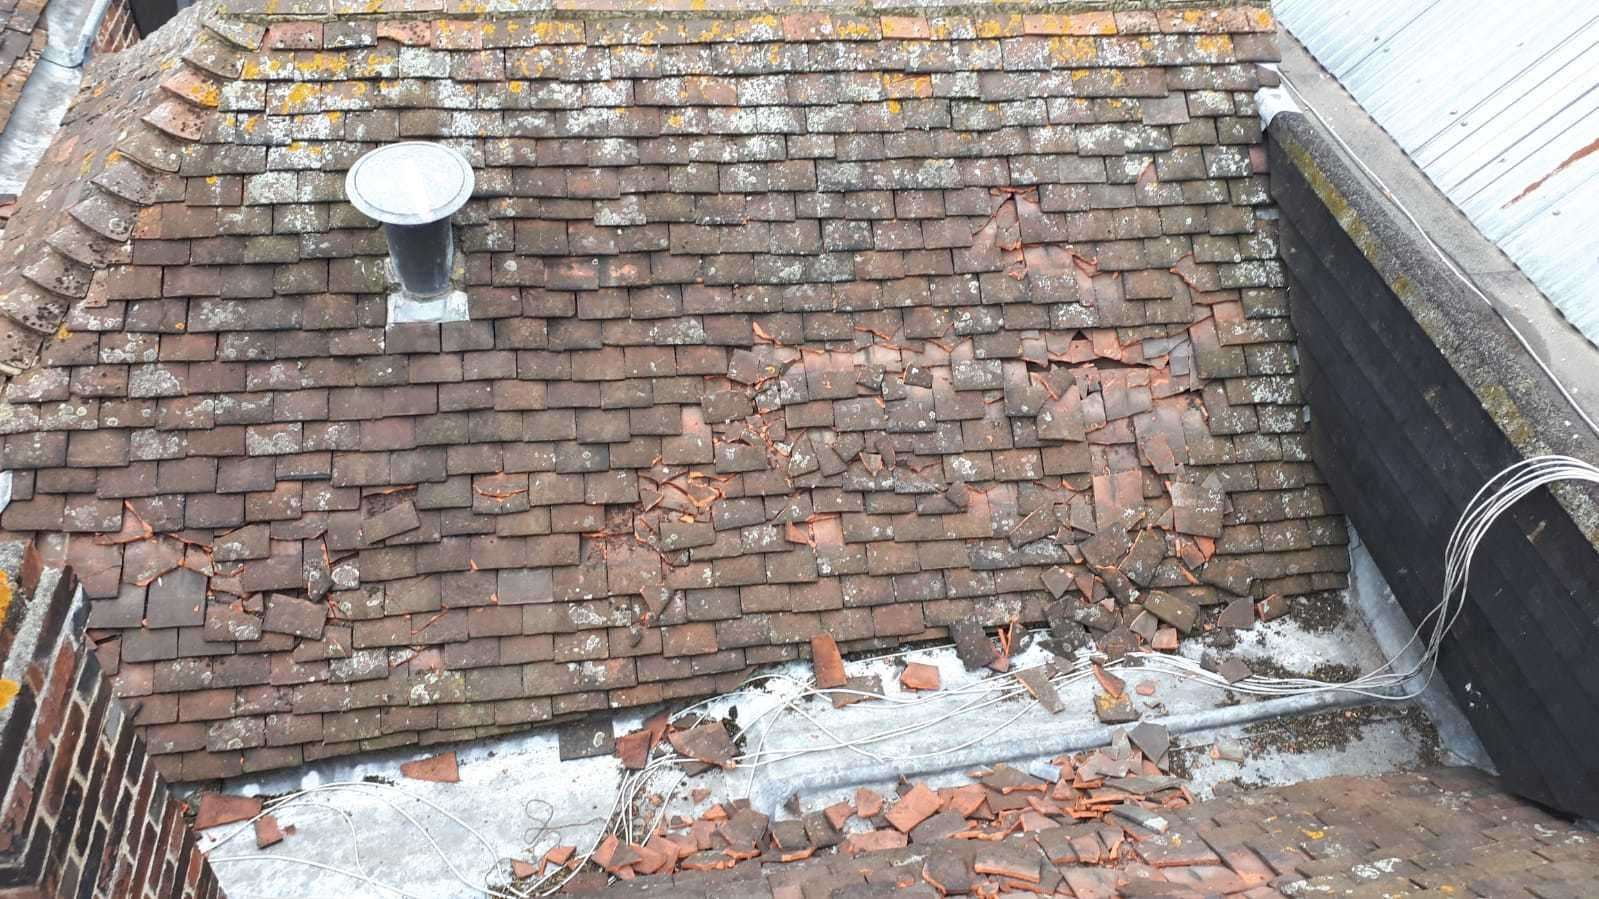 City roof tiles damaged by people running across them (53735293)